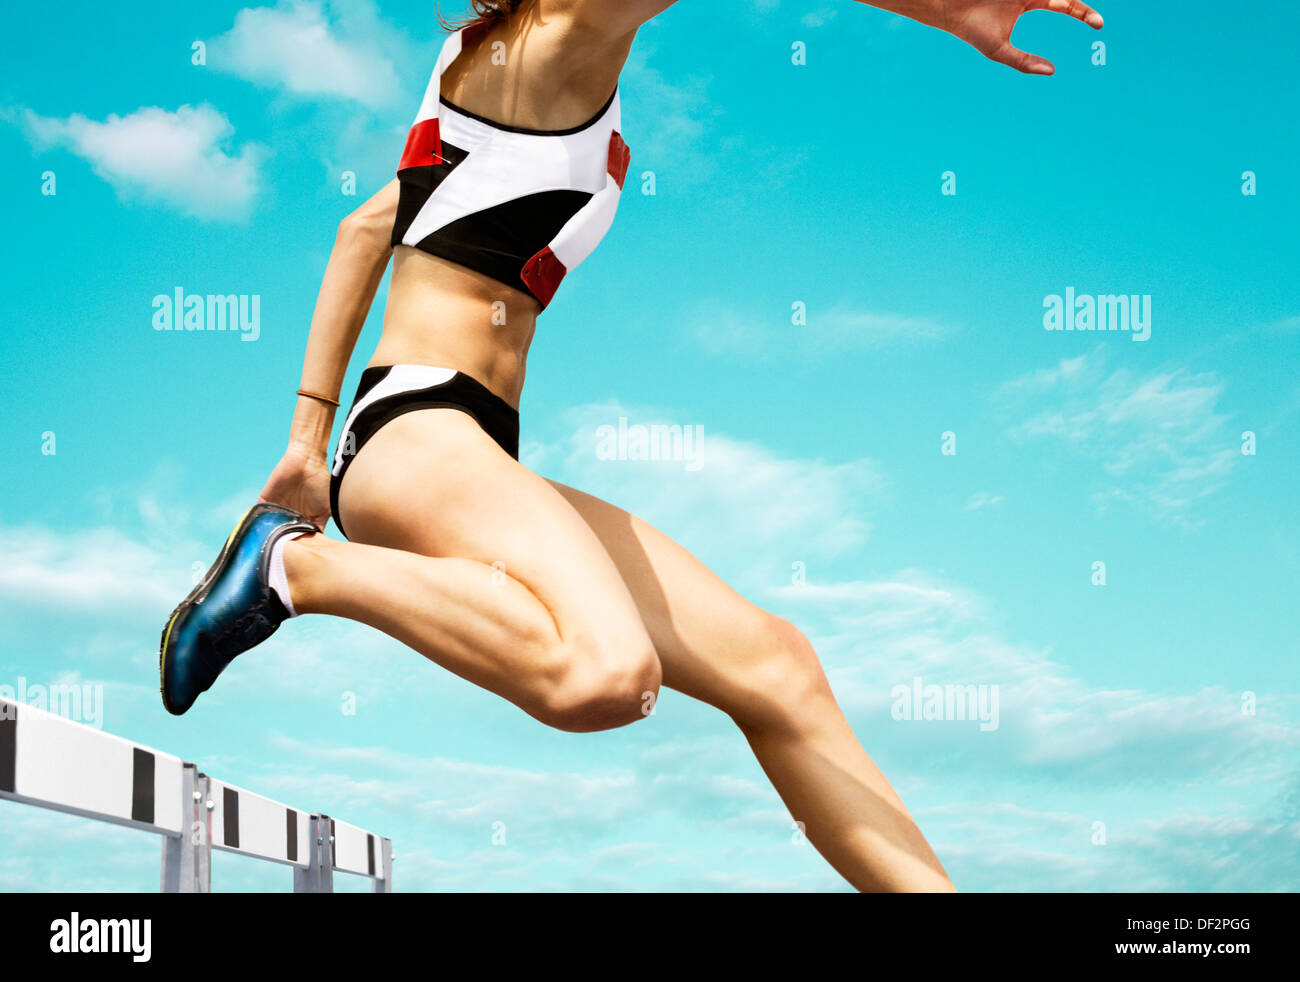 Female hurdle runner leaping over the hurdle Stock Photo